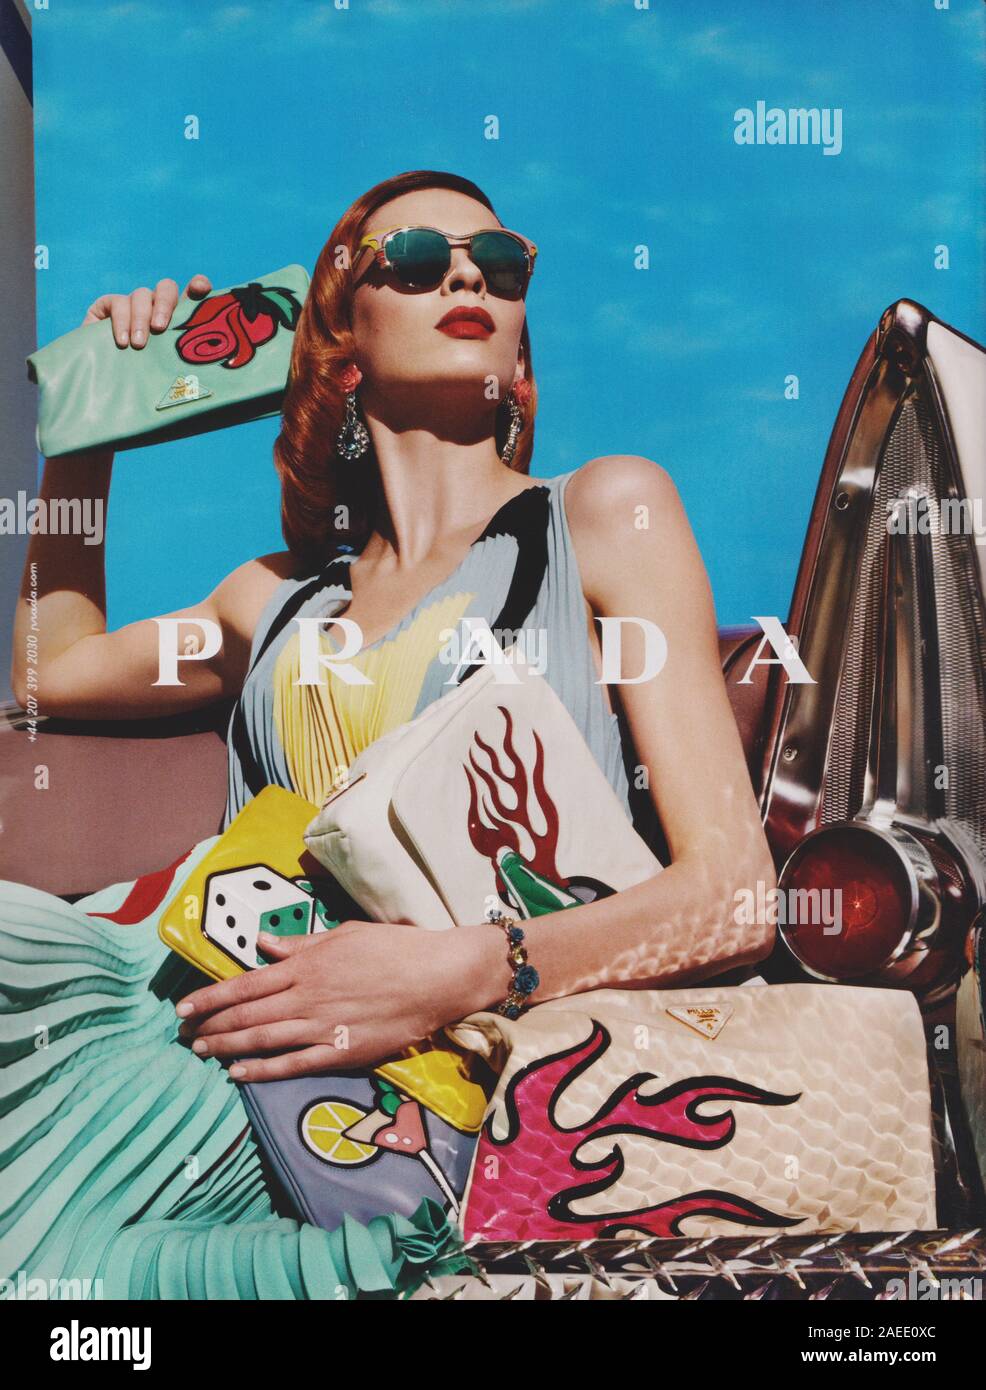 poster advertising Prada fashion house in paper magazine from 2012